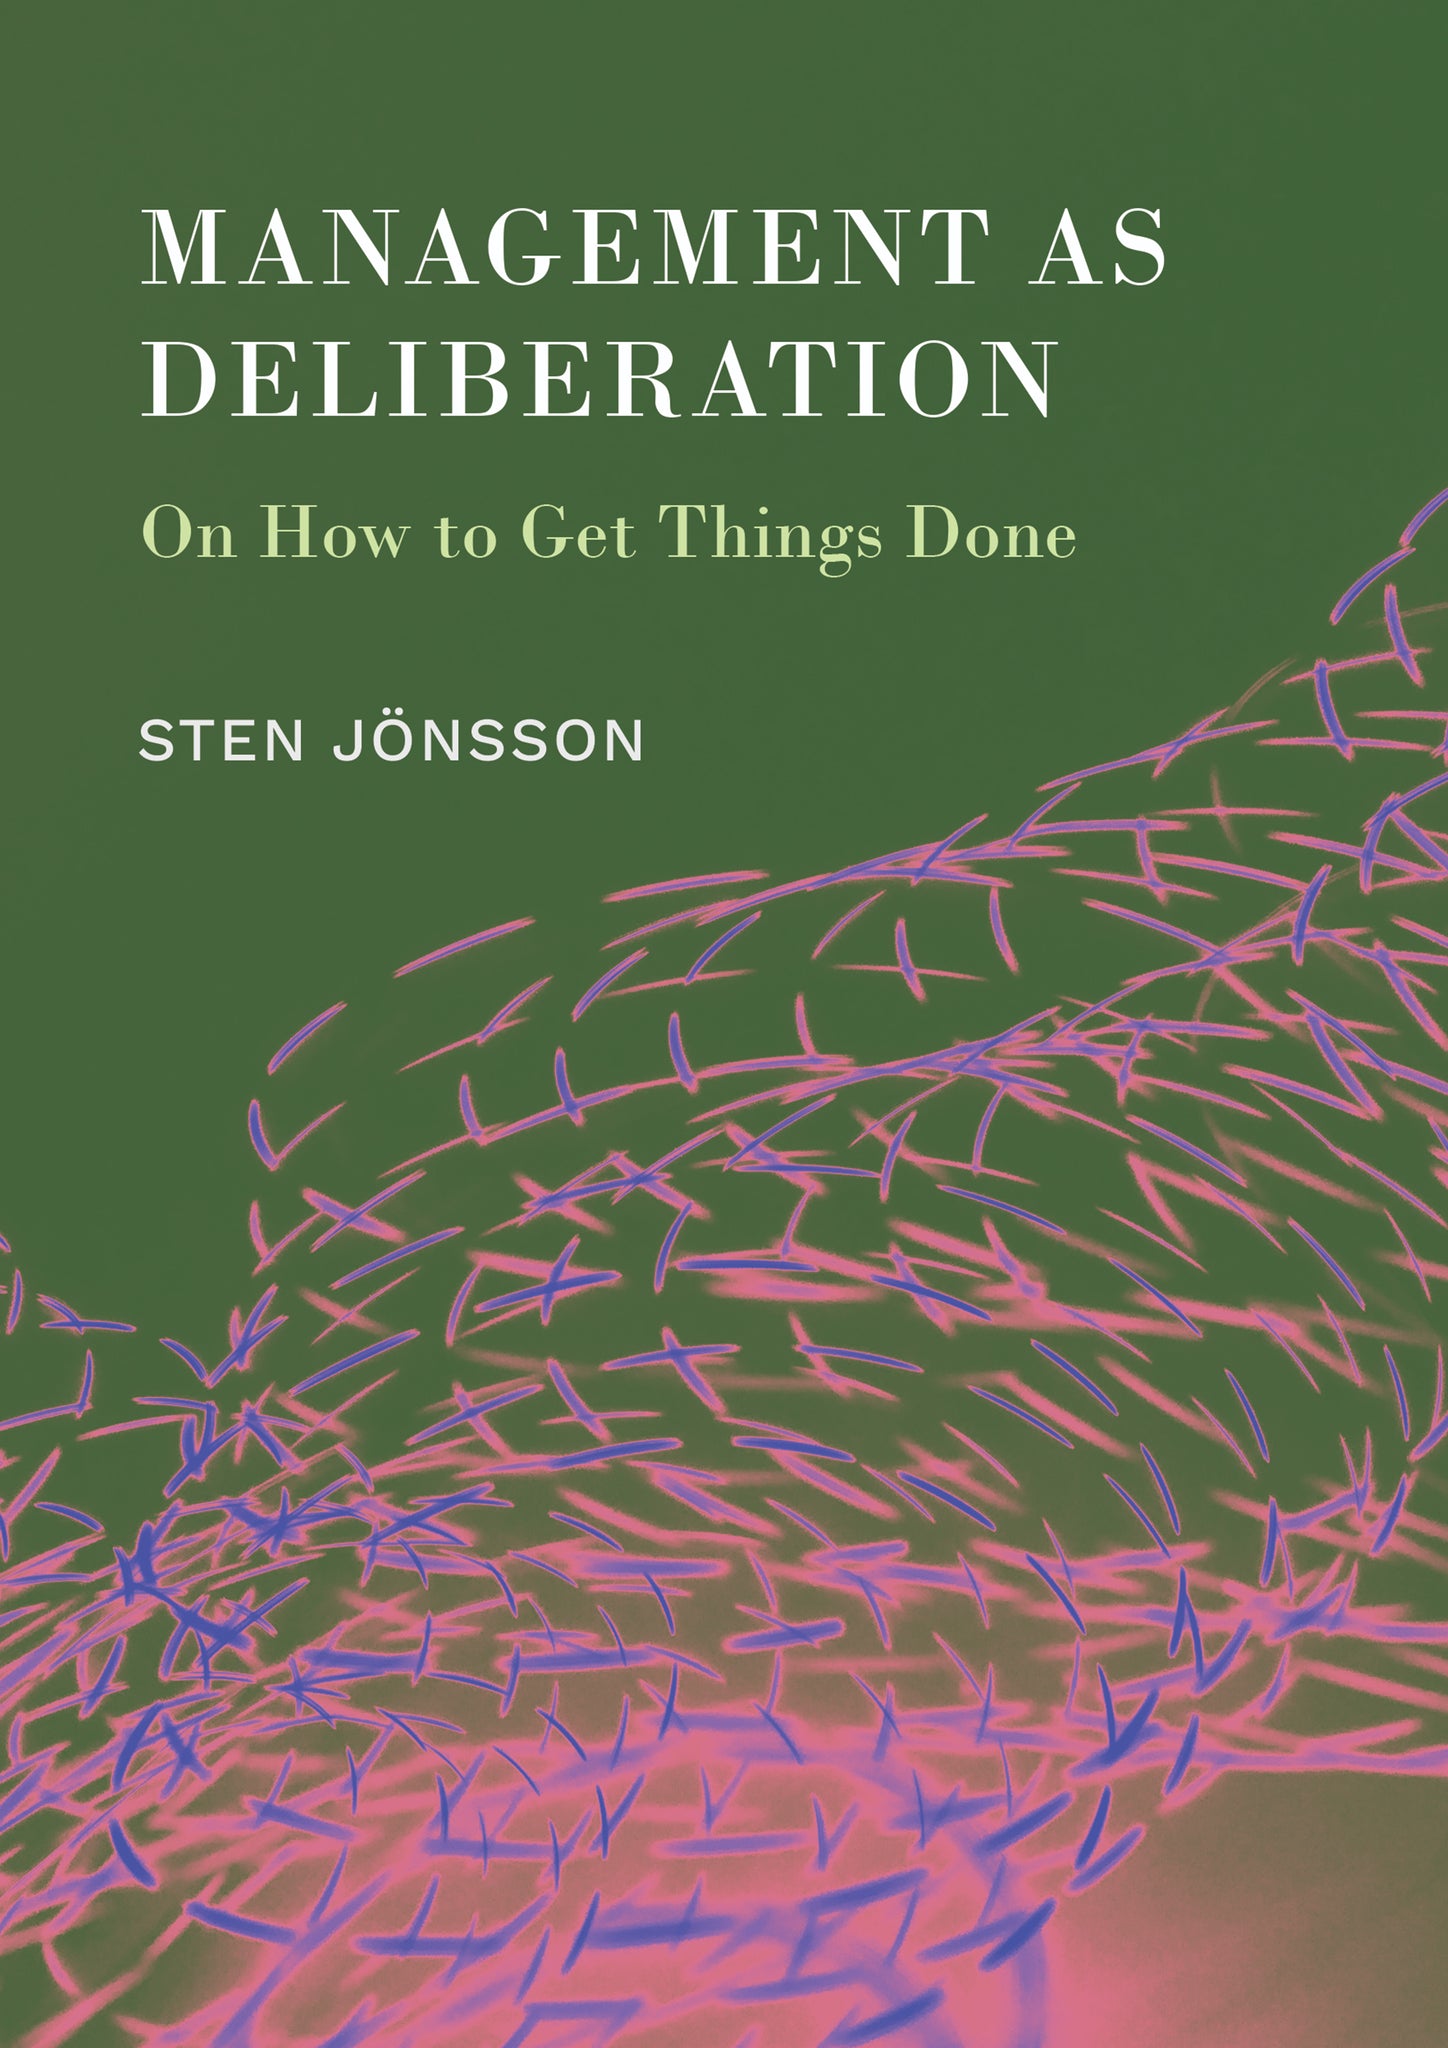 Management as Deliberation: On How to Get Things Done